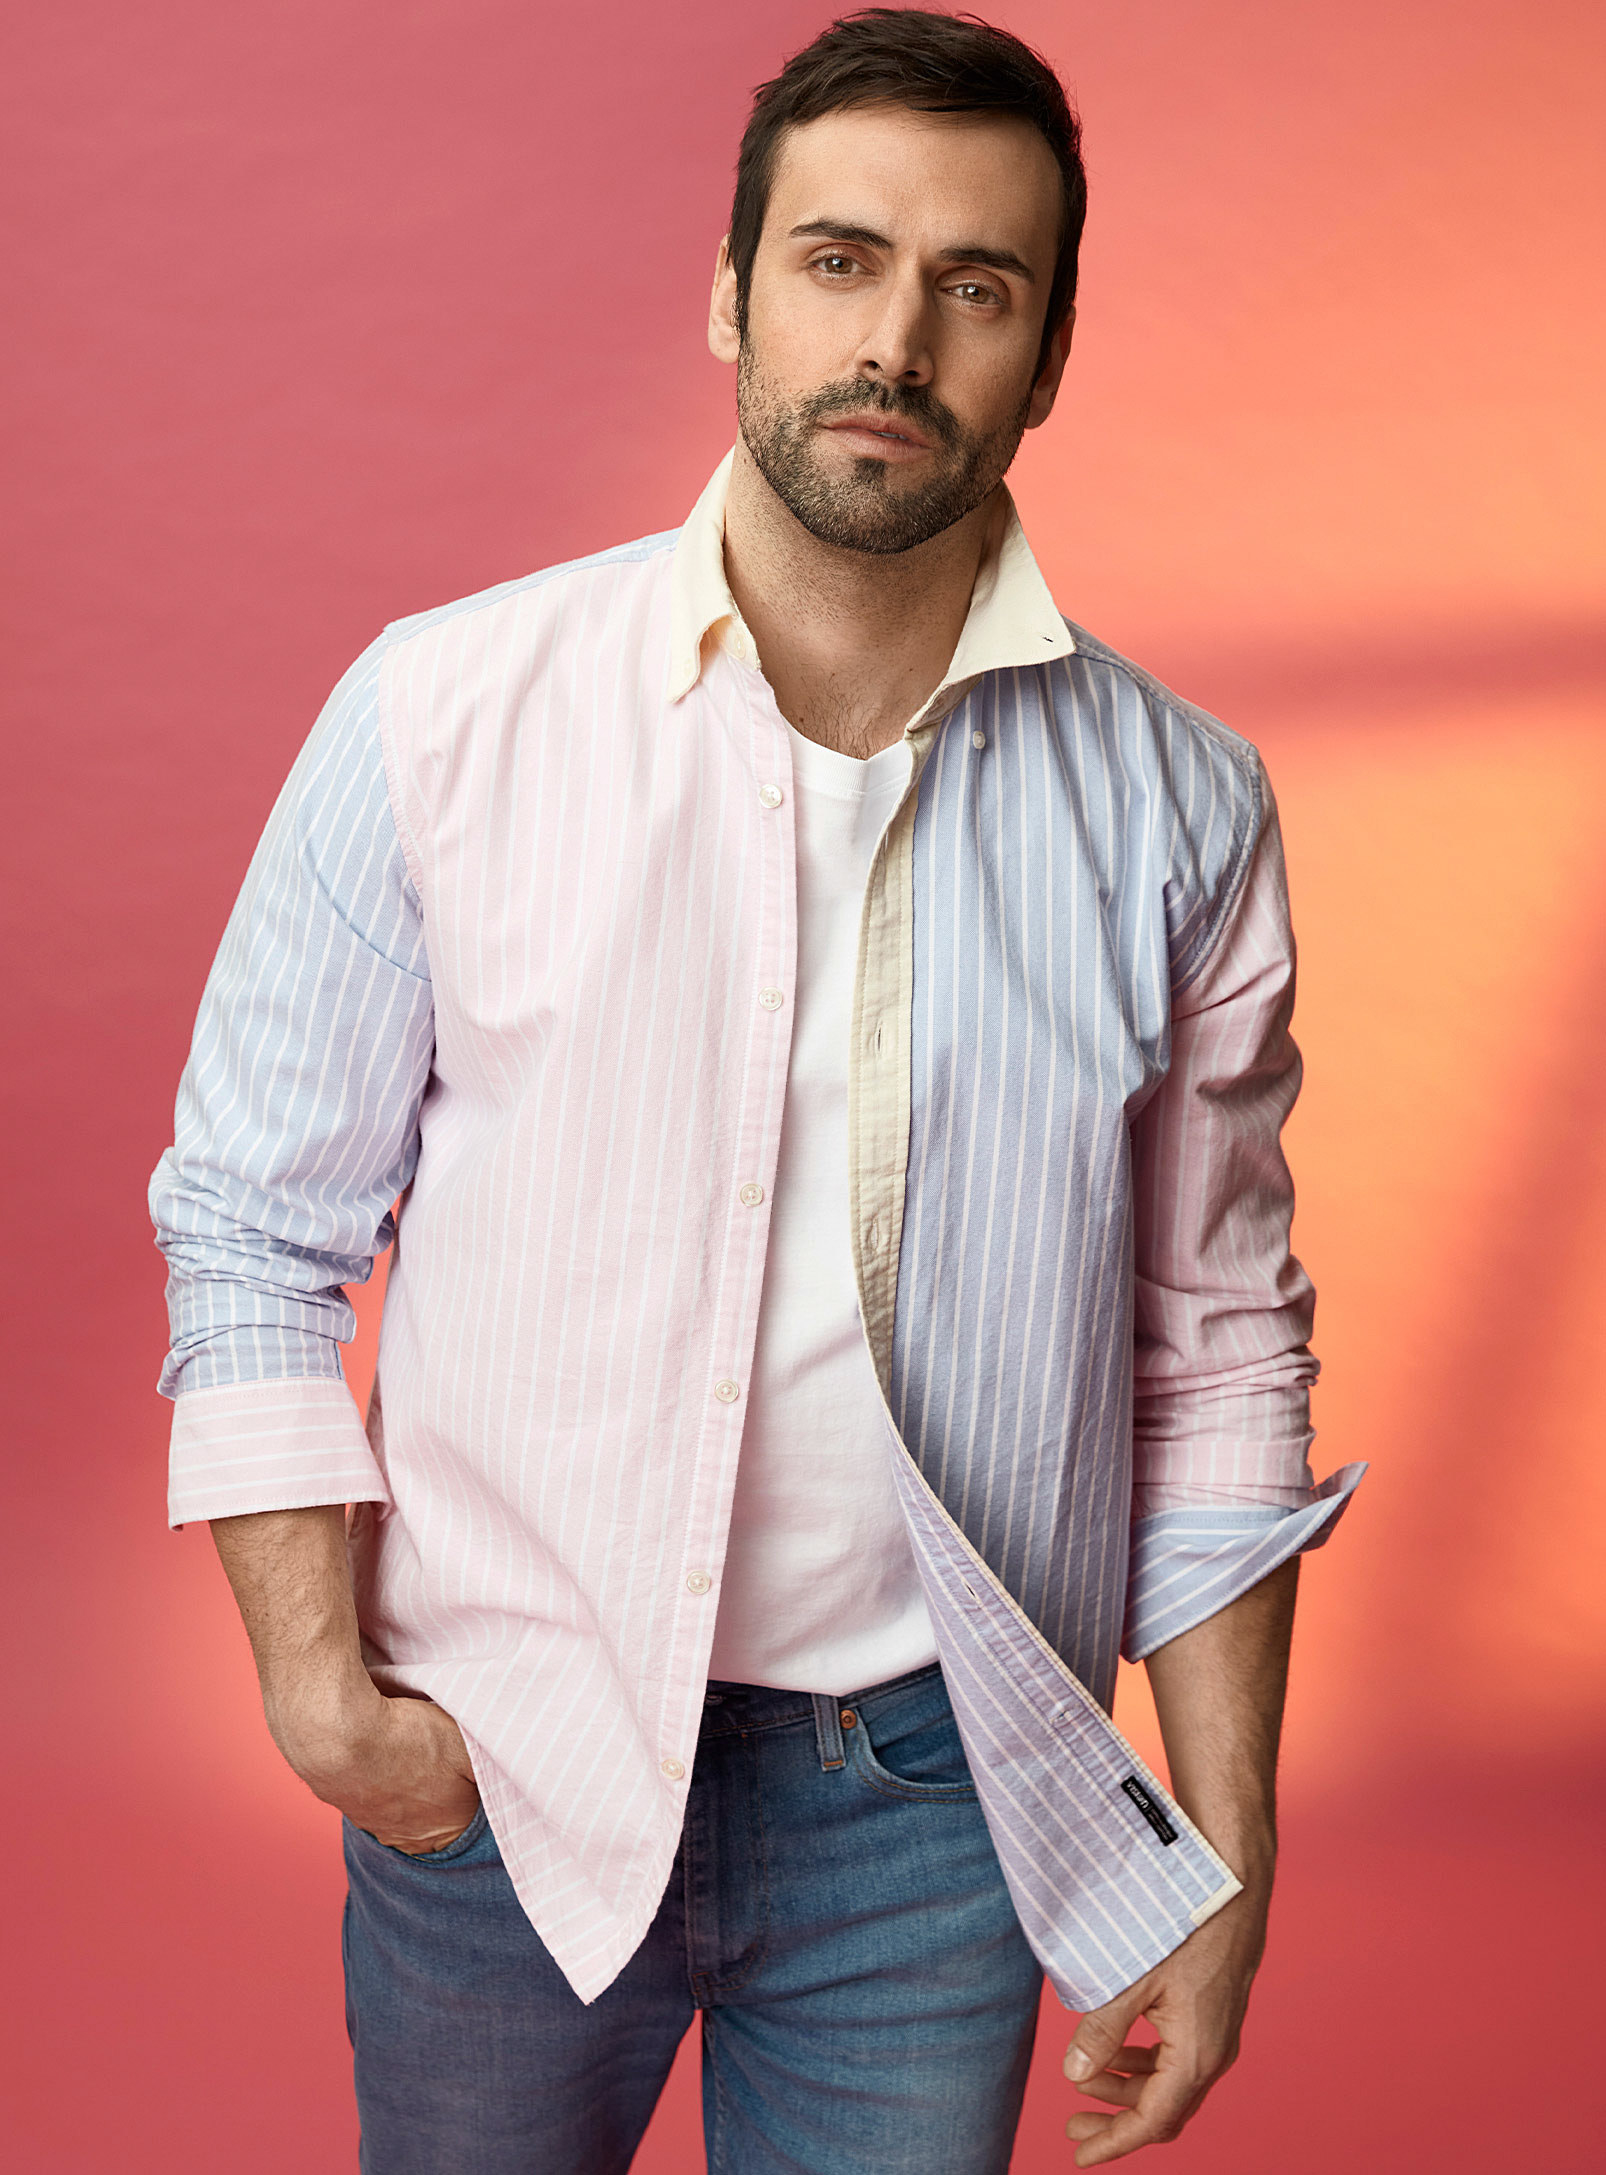 A person wearing a button up shirt over a T-shirt and jeans